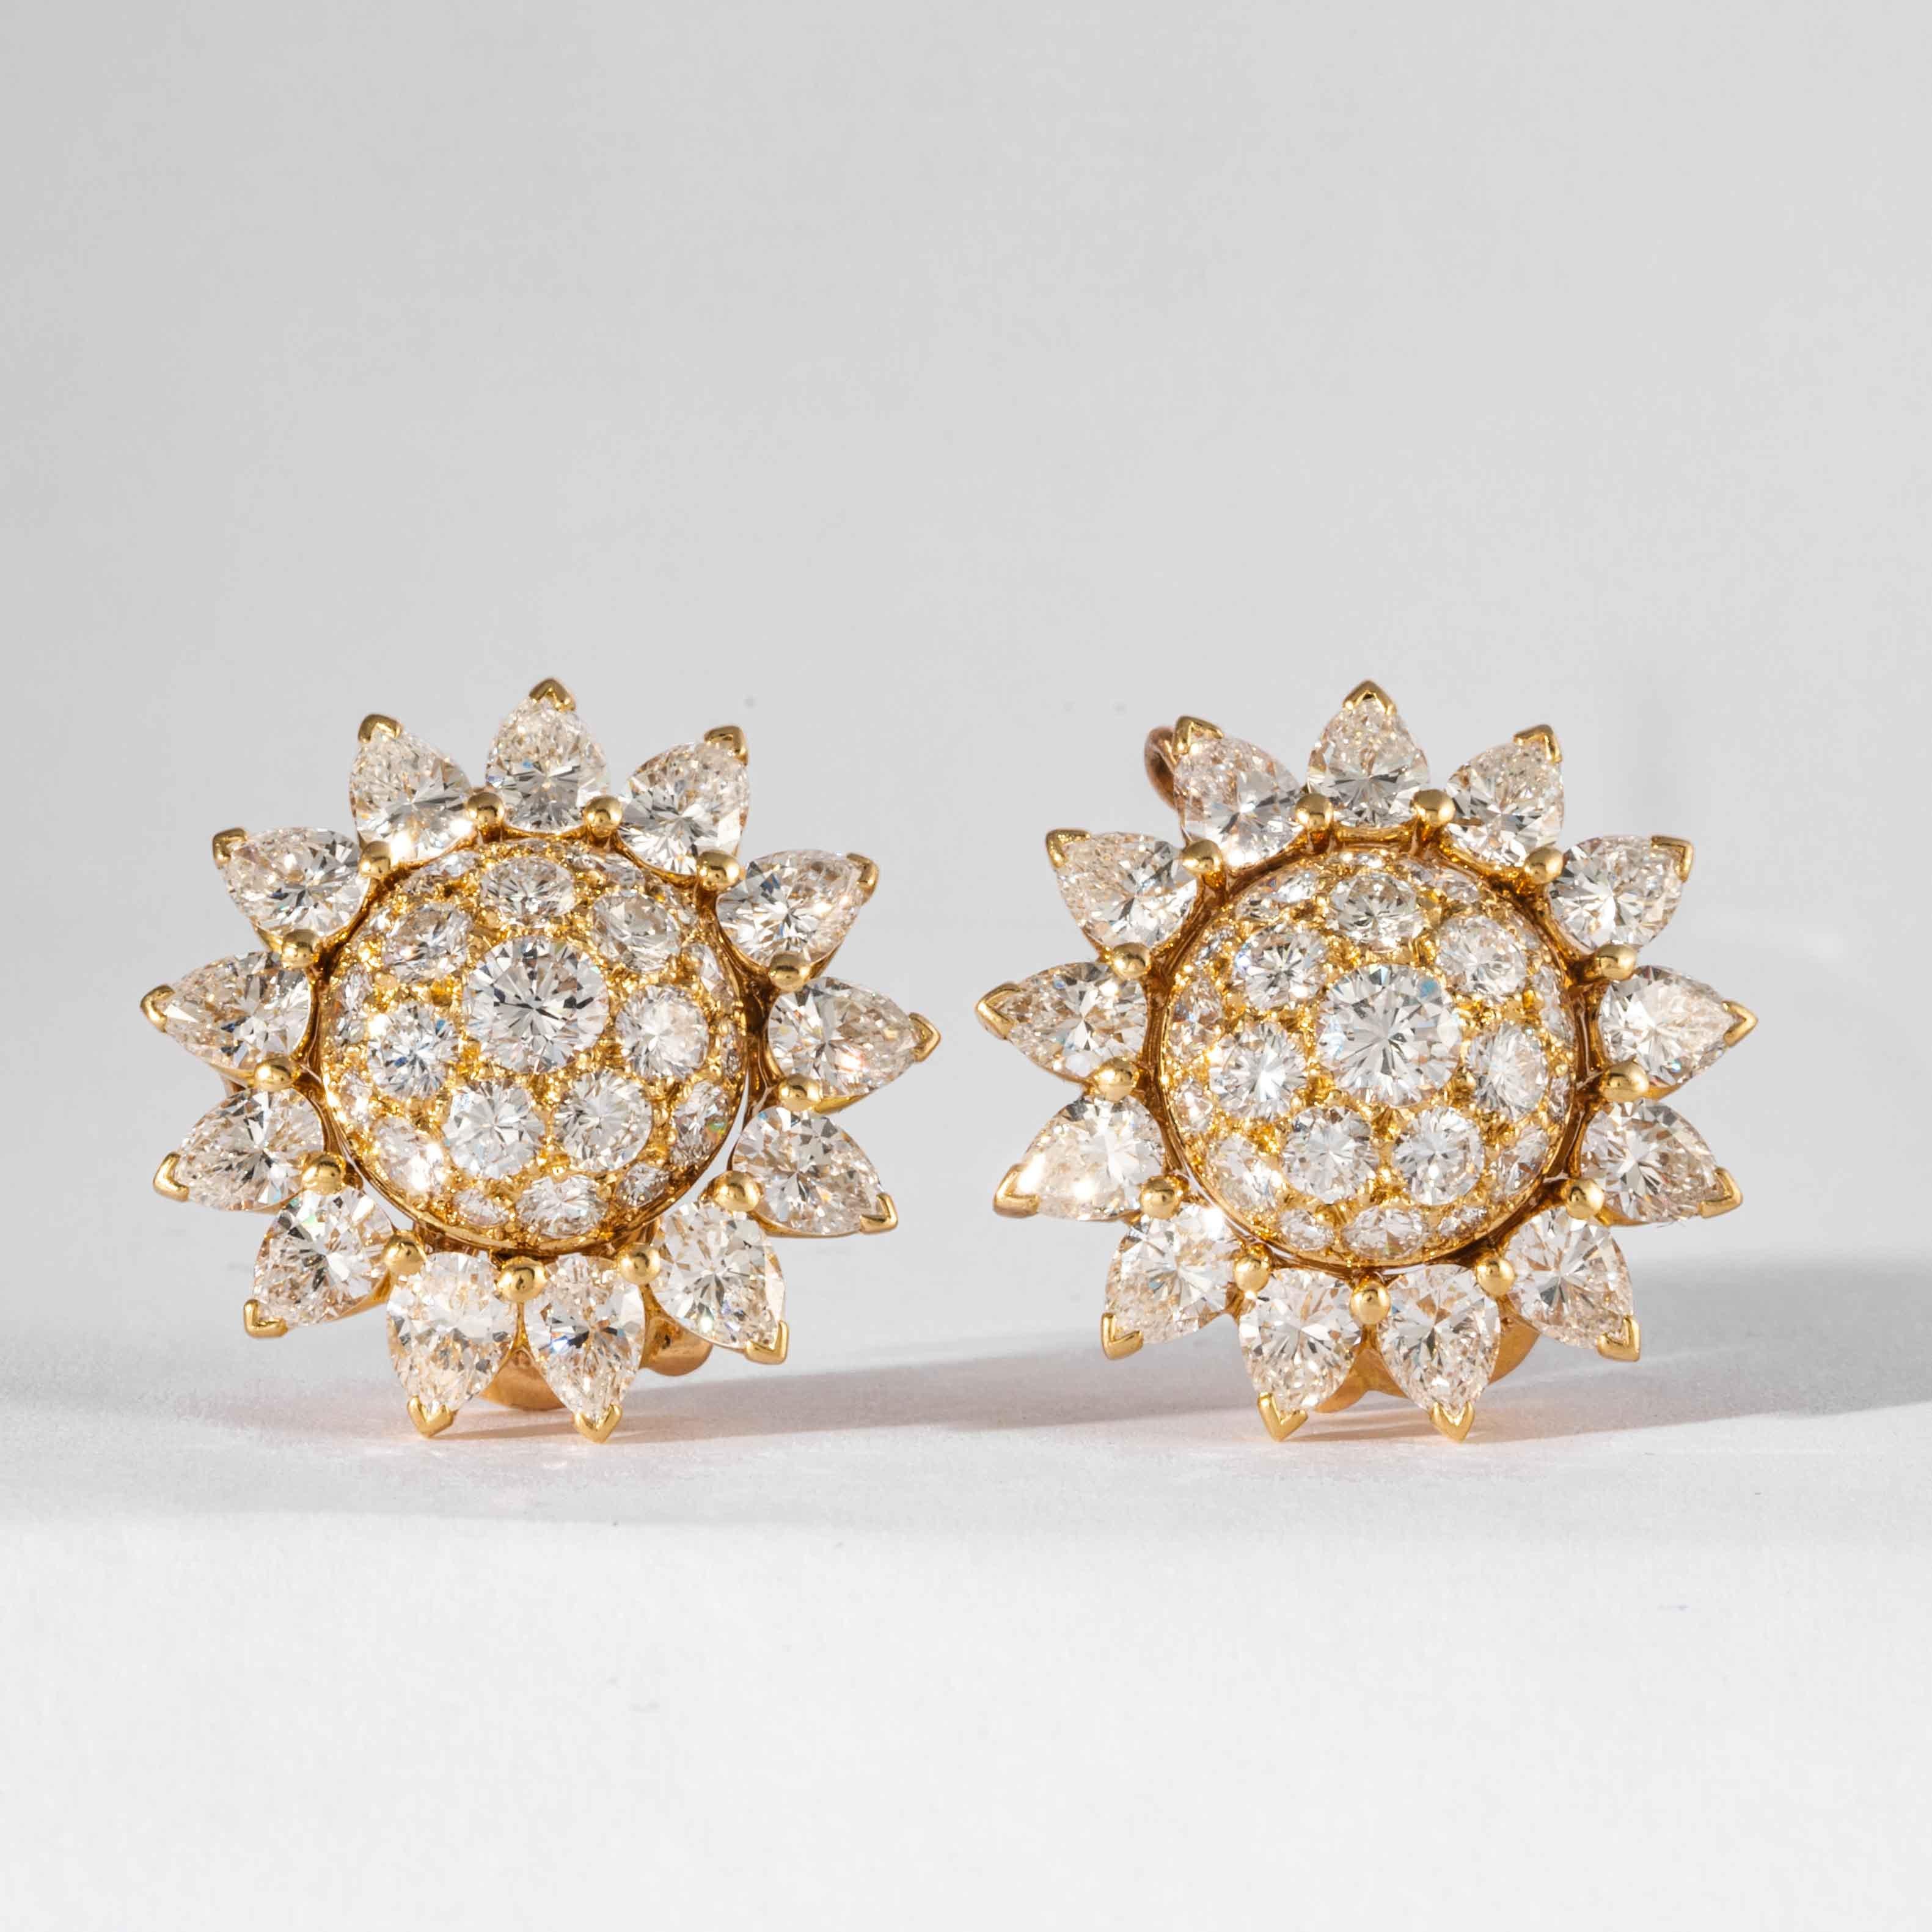 Cartier Diamond and 18kt Yellow Gold Sun Flower Motif Cluster Earrings, consisting of 25 pear shape diamonds and 44 full cut round diamonds, having a total approximate weight of 7.00 carats of colorless and VS1-VS2 clarity. Earrings have well